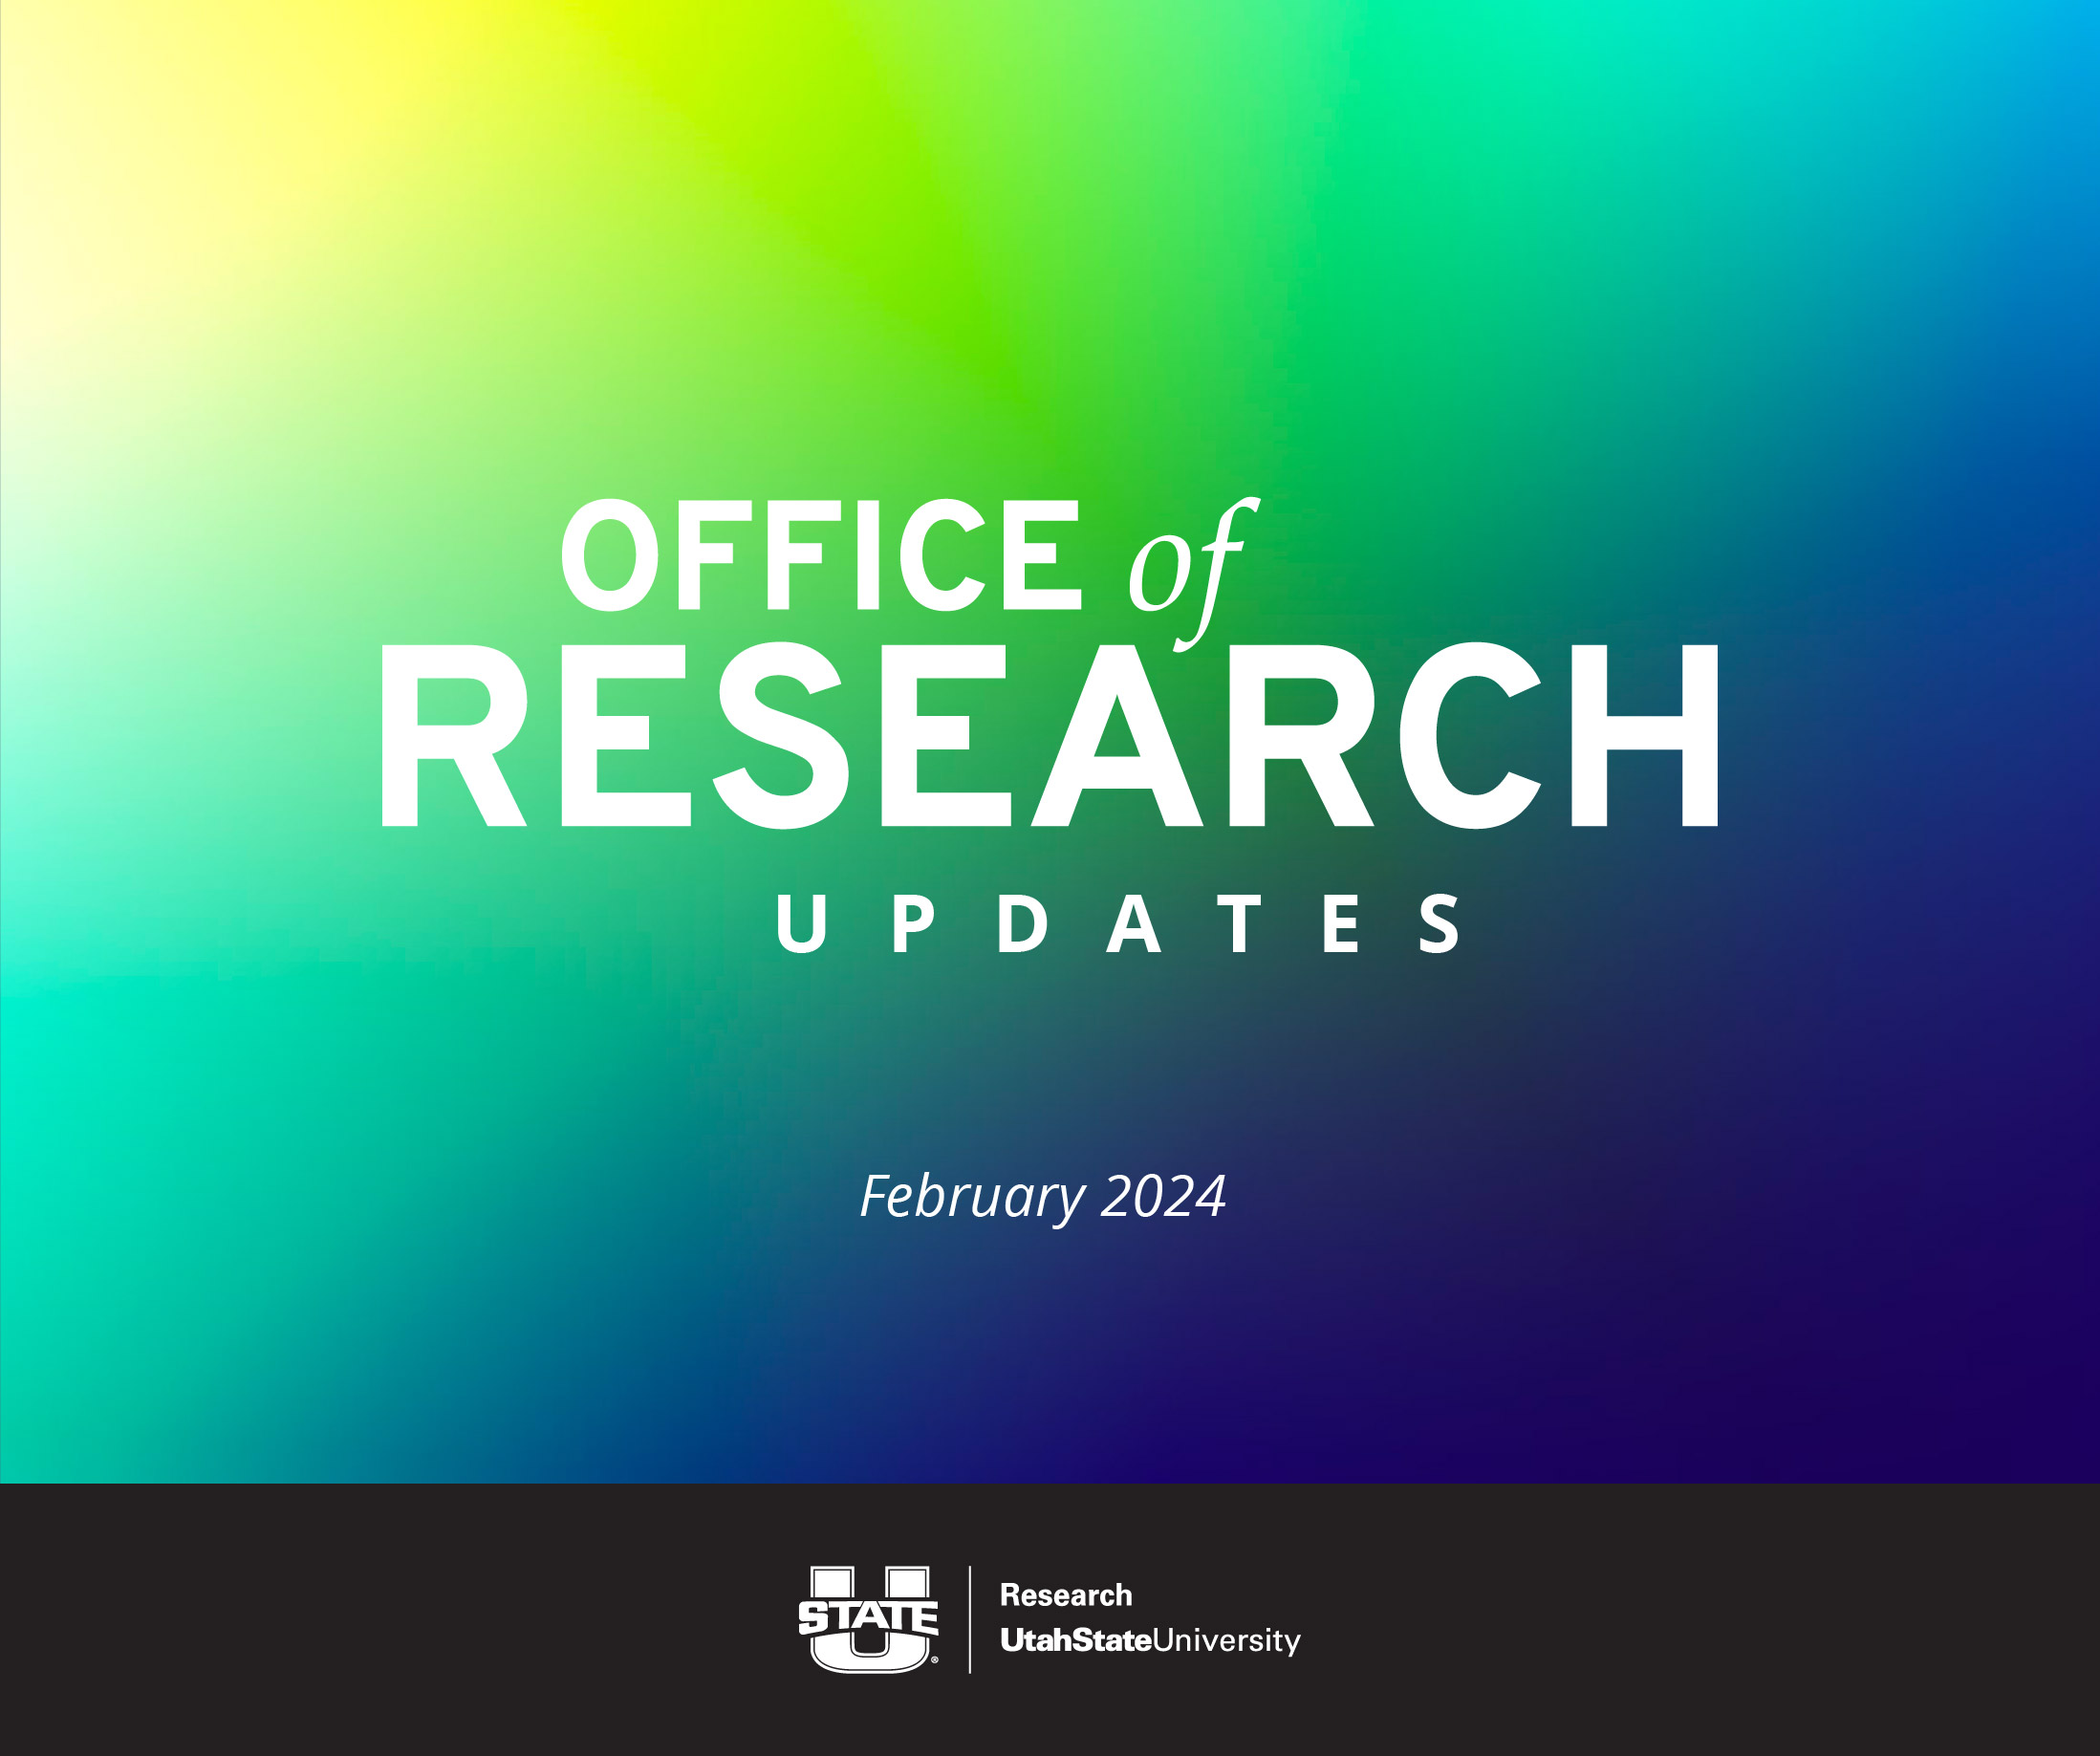 Office of research updates February 2024